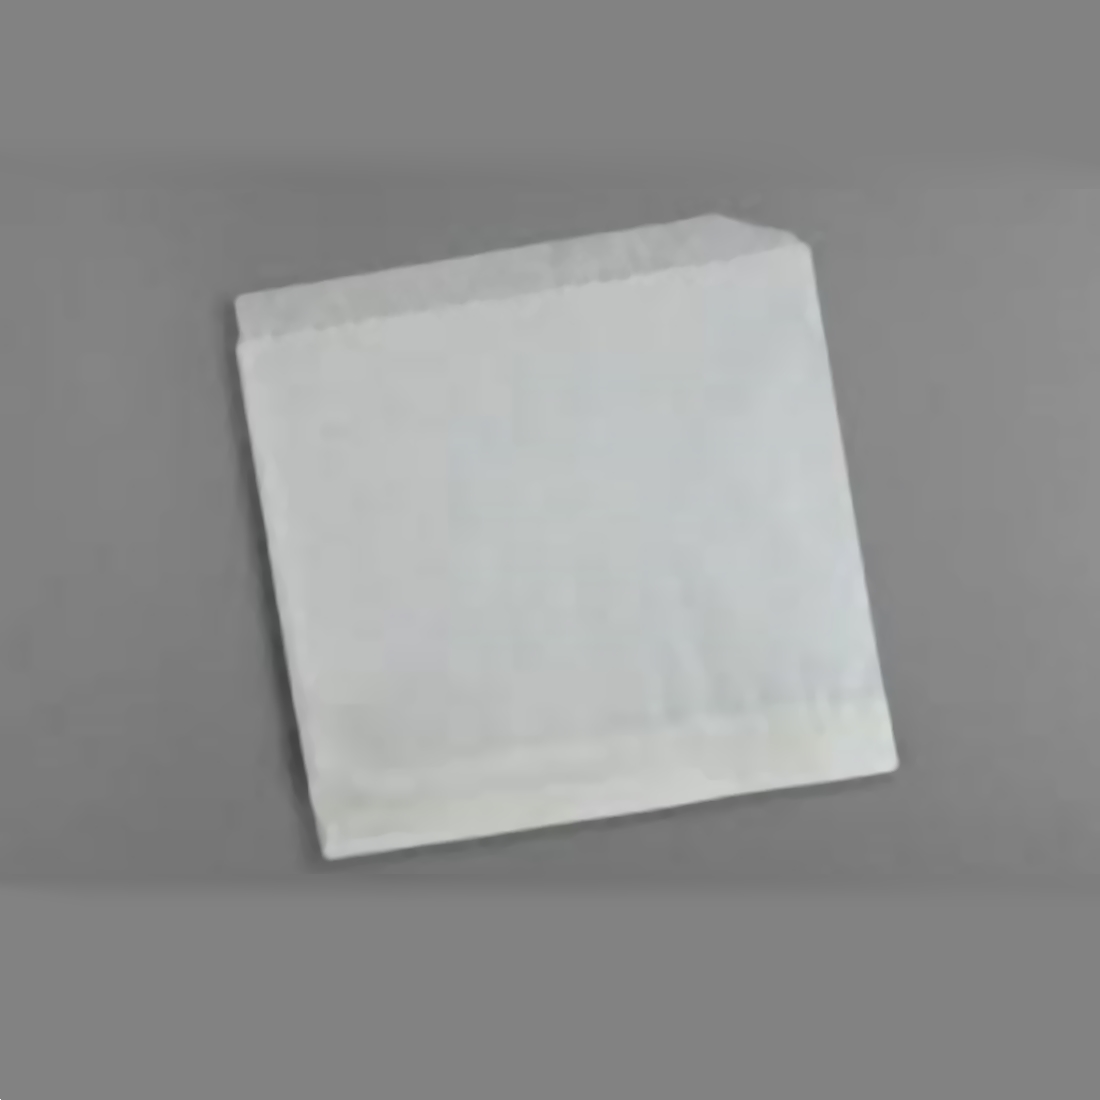 7x6.5 GREASE RESIST SANDWICH
BAG WHITE BAG DOUBLE OPENING
1000/BX